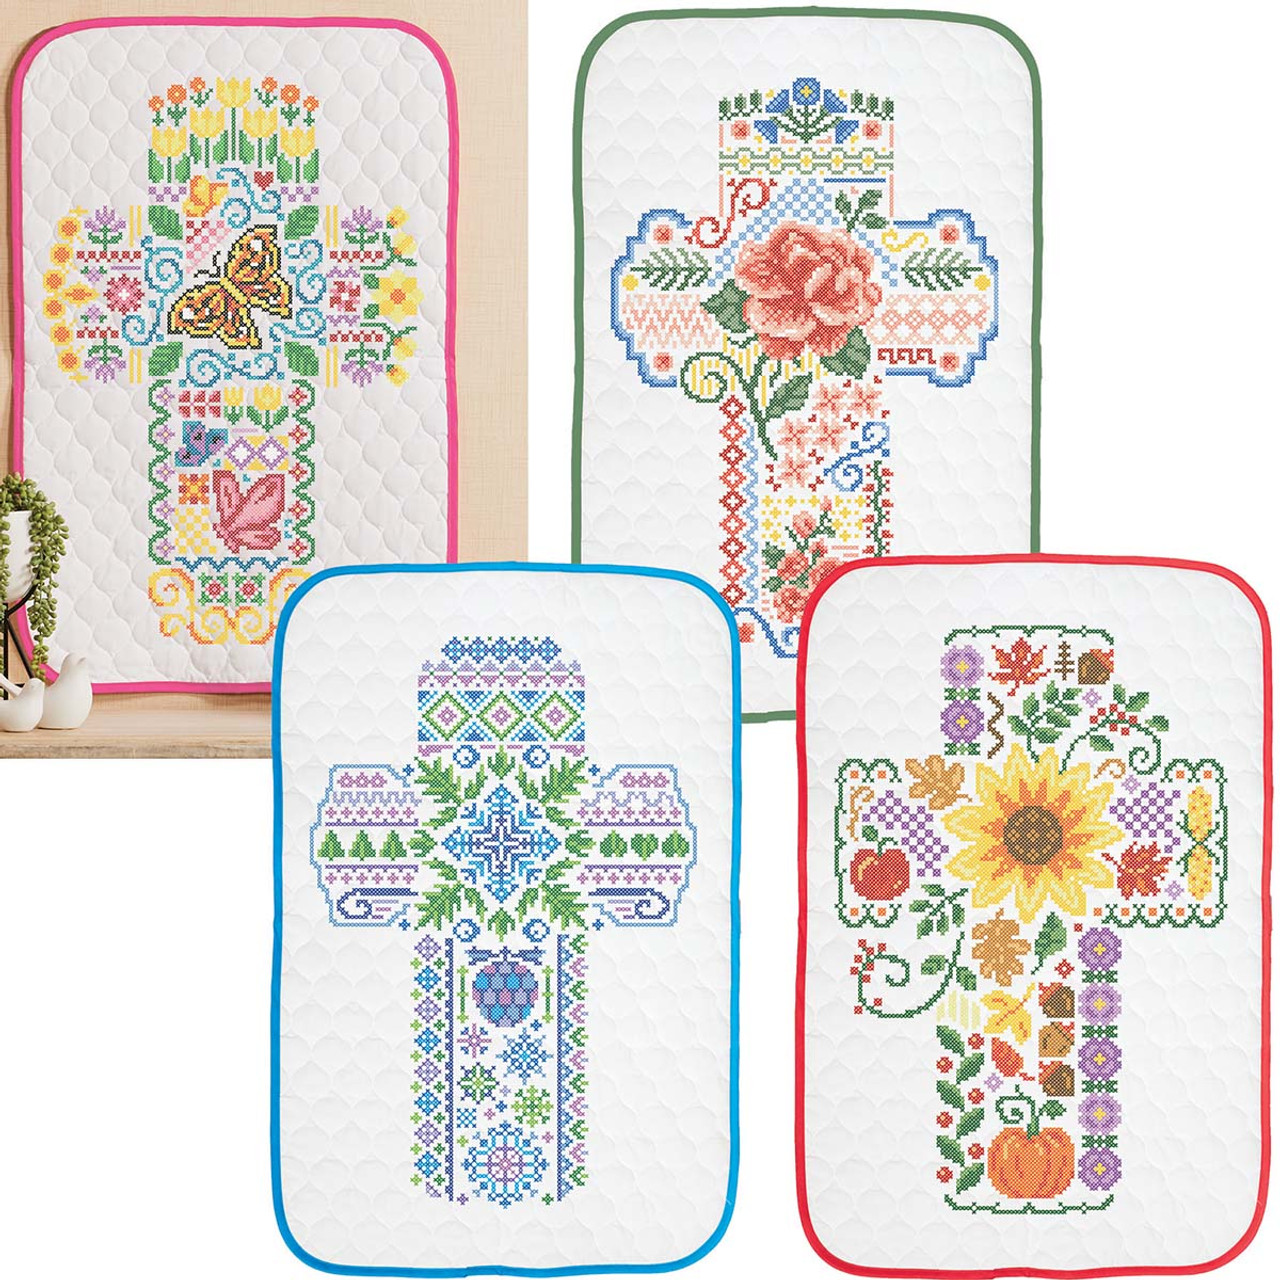 Herrschners Summer Cross Wall Hanging Stamped Cross-Stitch Kit